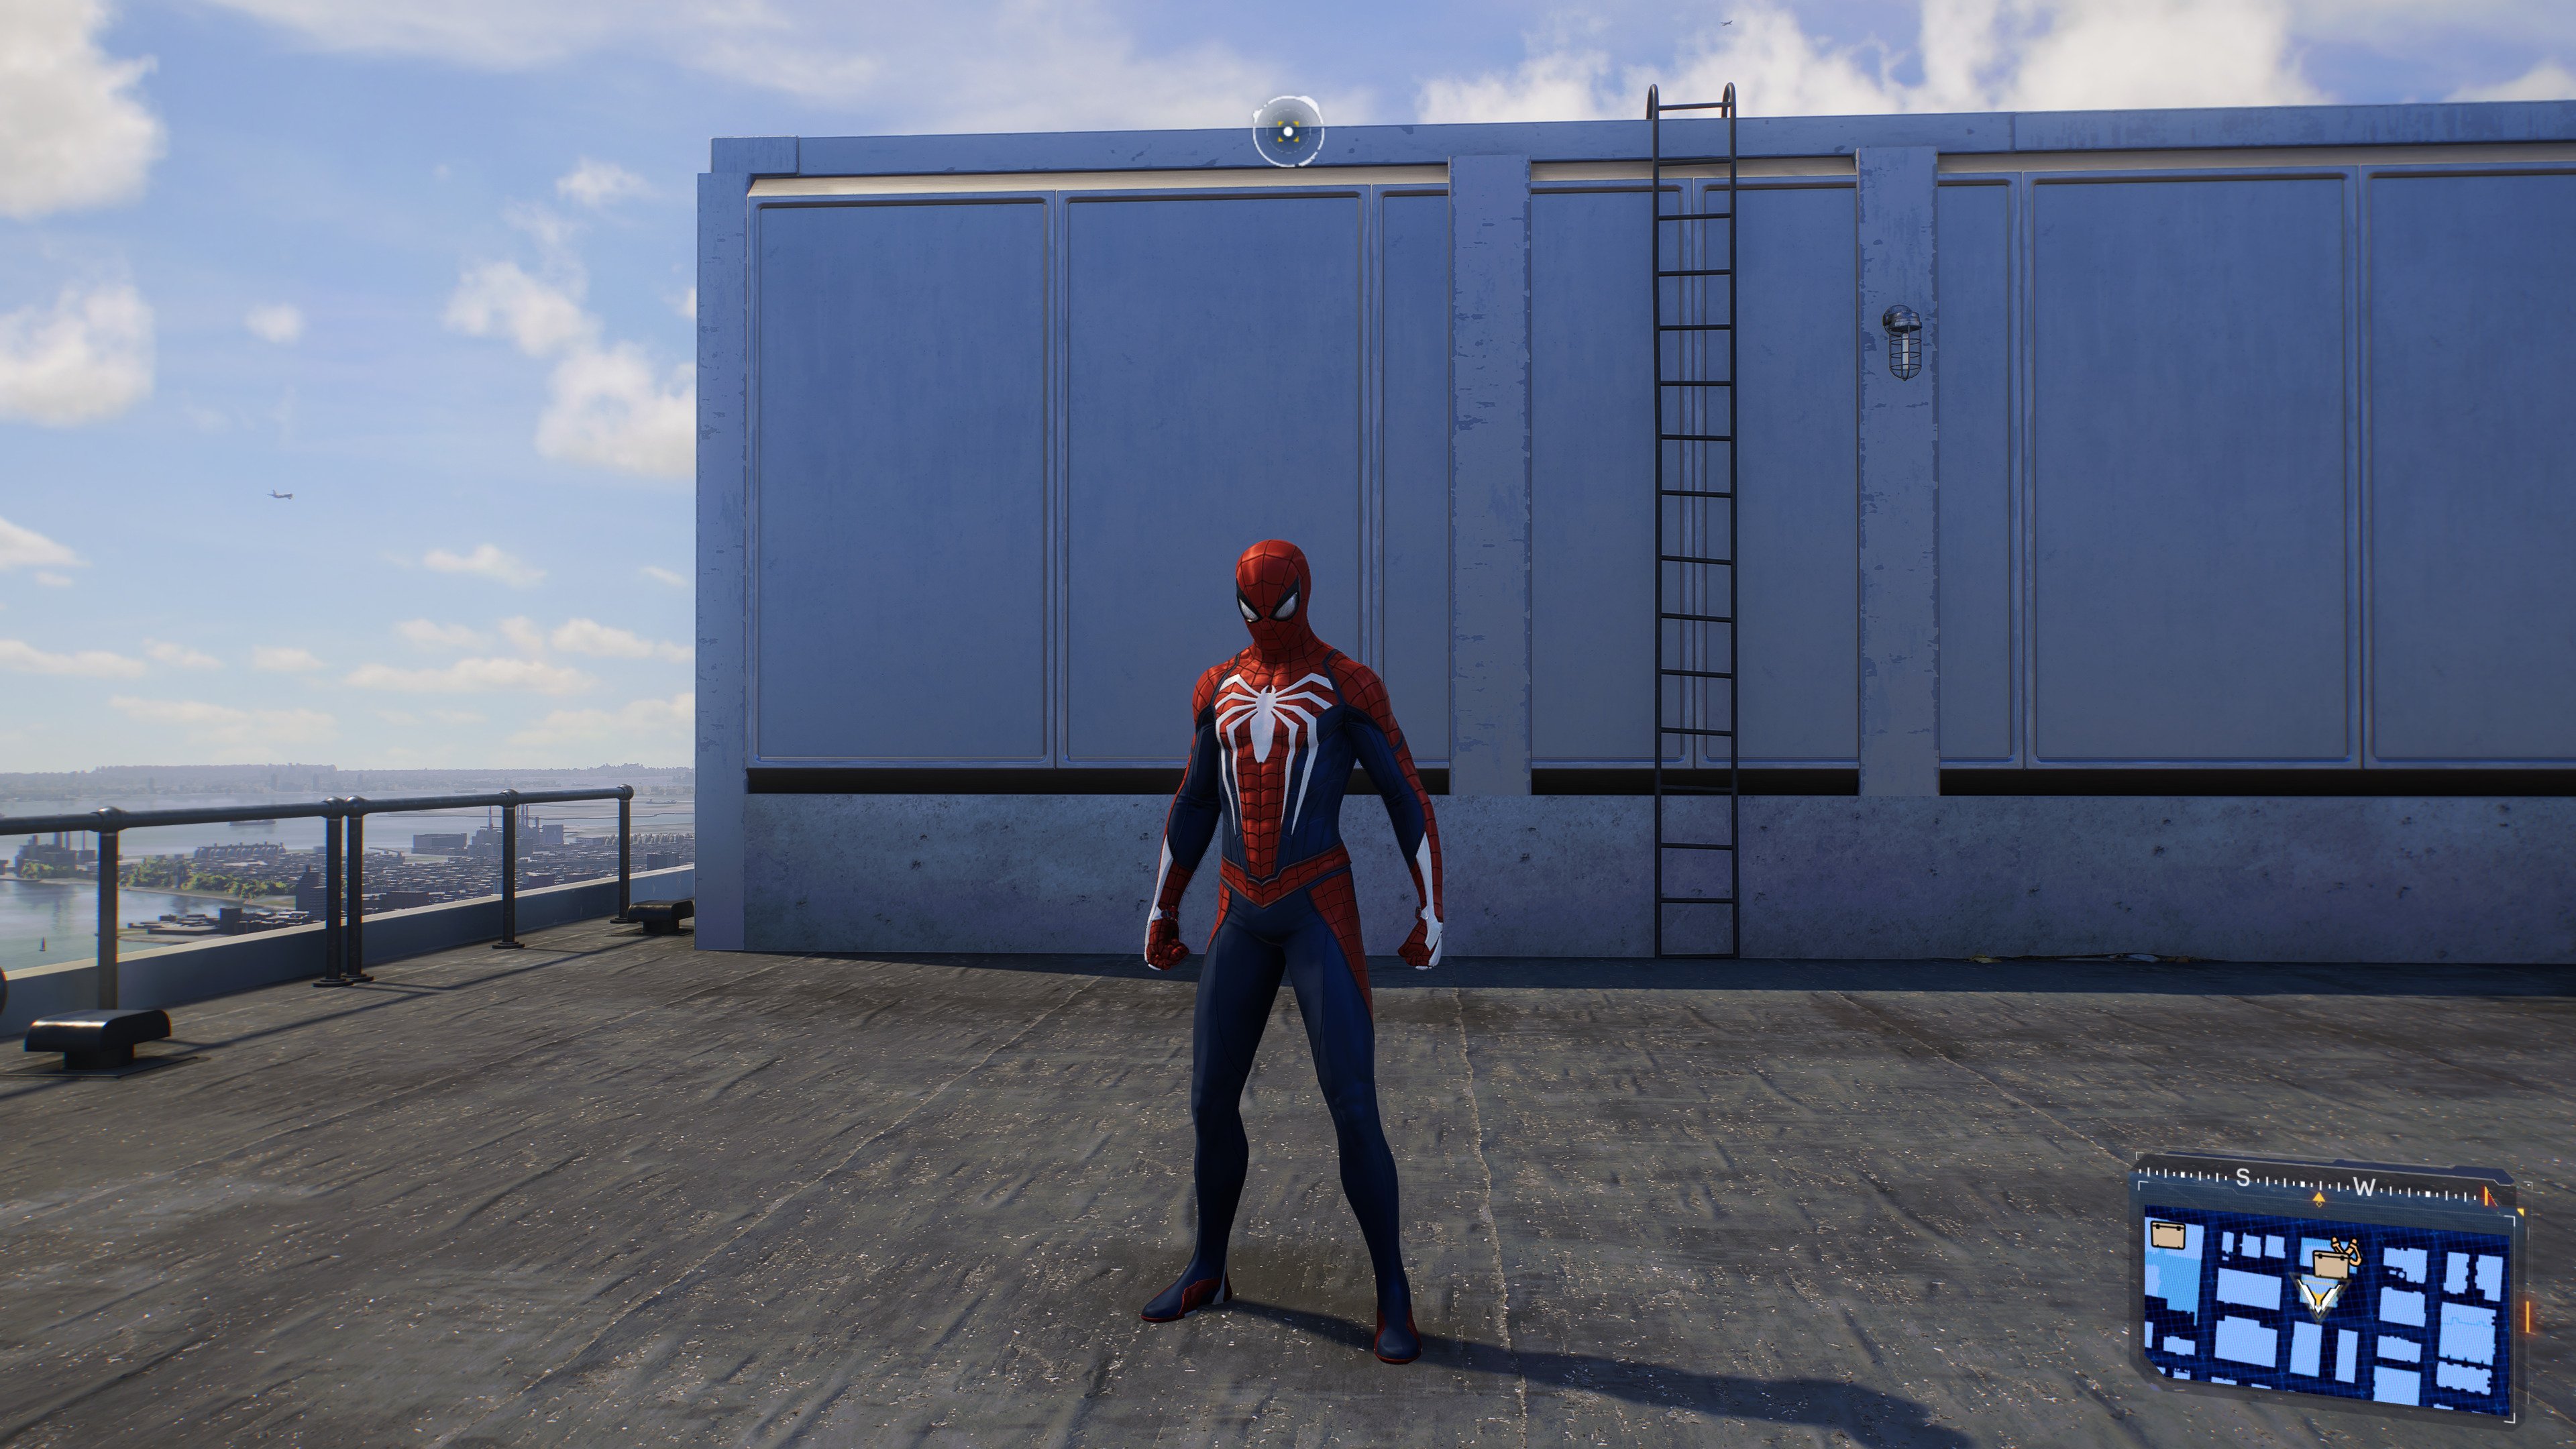 All Marvel's Spider-Man 2 suits & how to unlock them - Charlie INTEL